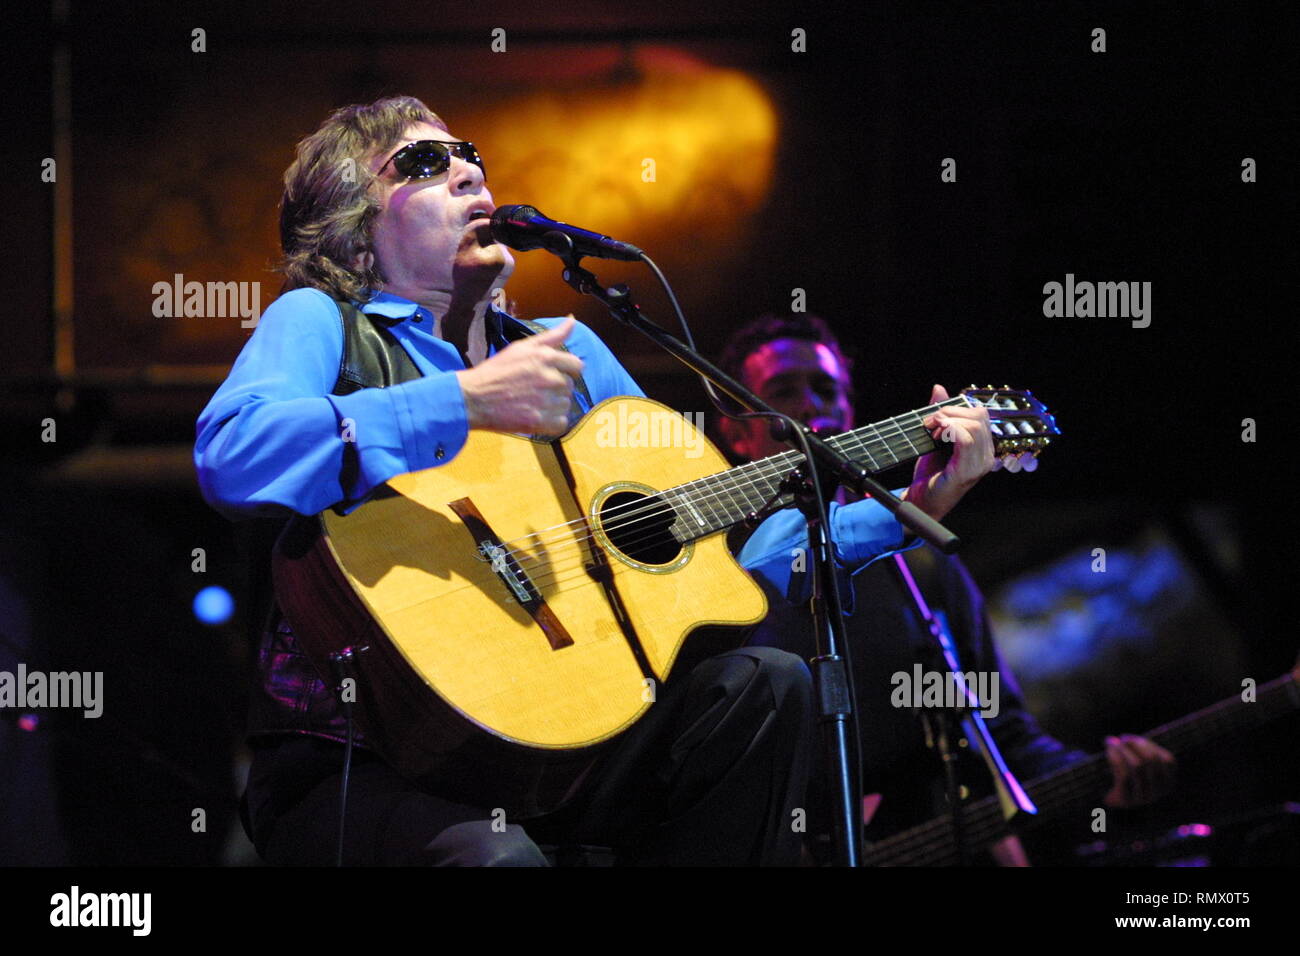 Puerto Rican singer and virtuoso guitarist, JosŽFeliciano, born permanently blind due to congenital glaucoma, is shown performing on stage during a "live" concert appearance. Stock Photo